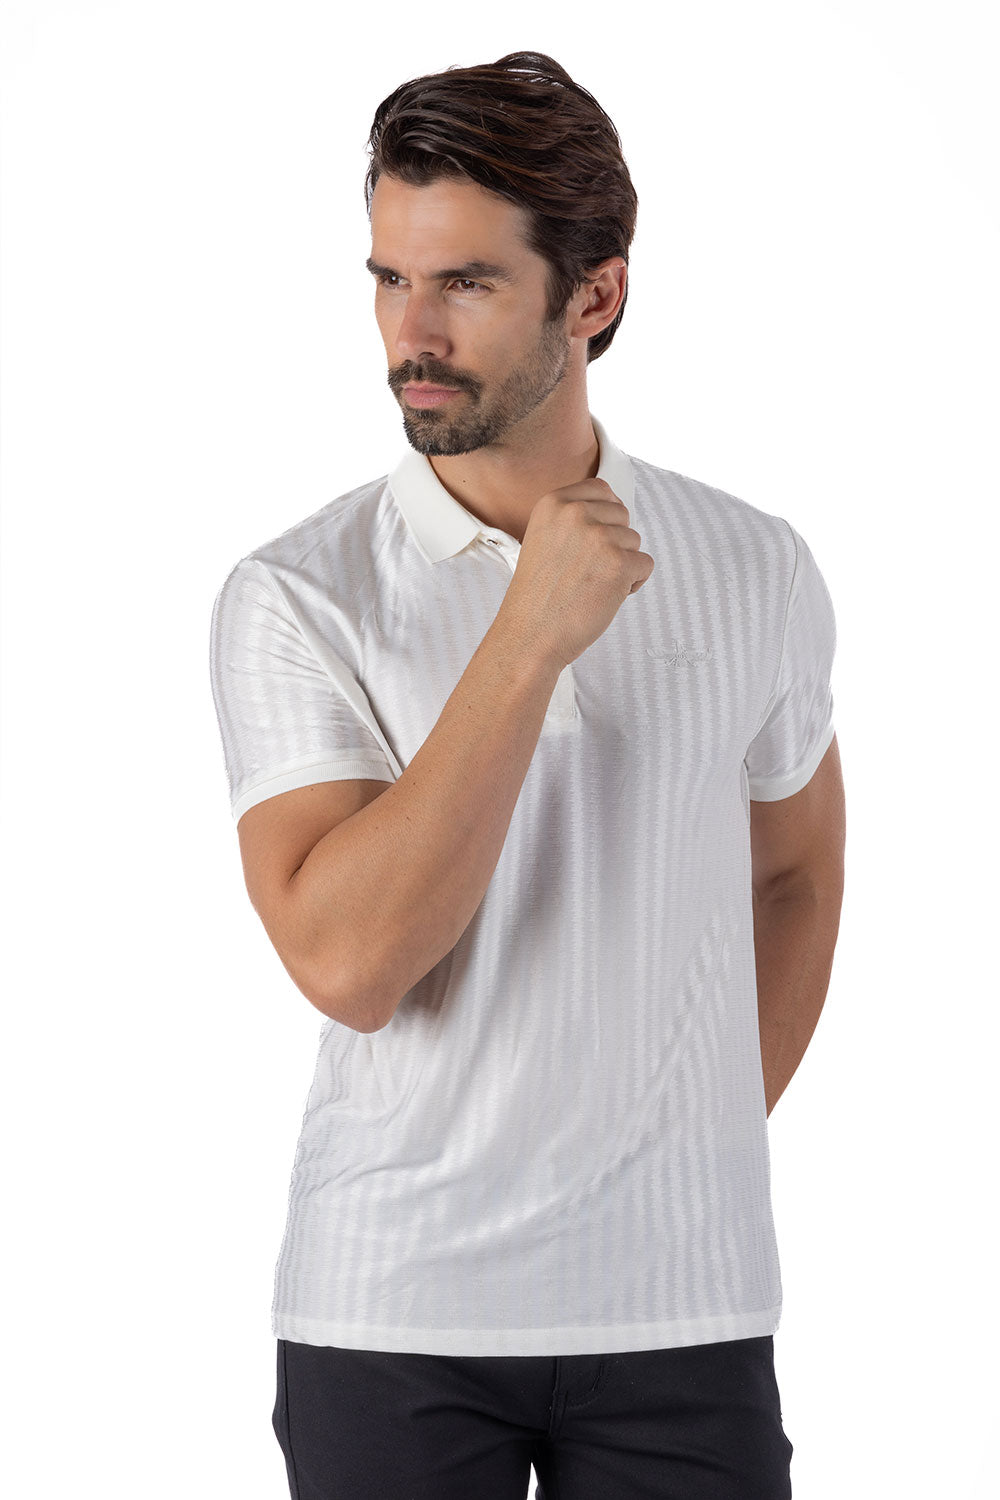 Barabas Men's Striped Solid Color Stretch Luxury Polo Shirts 4P30 White